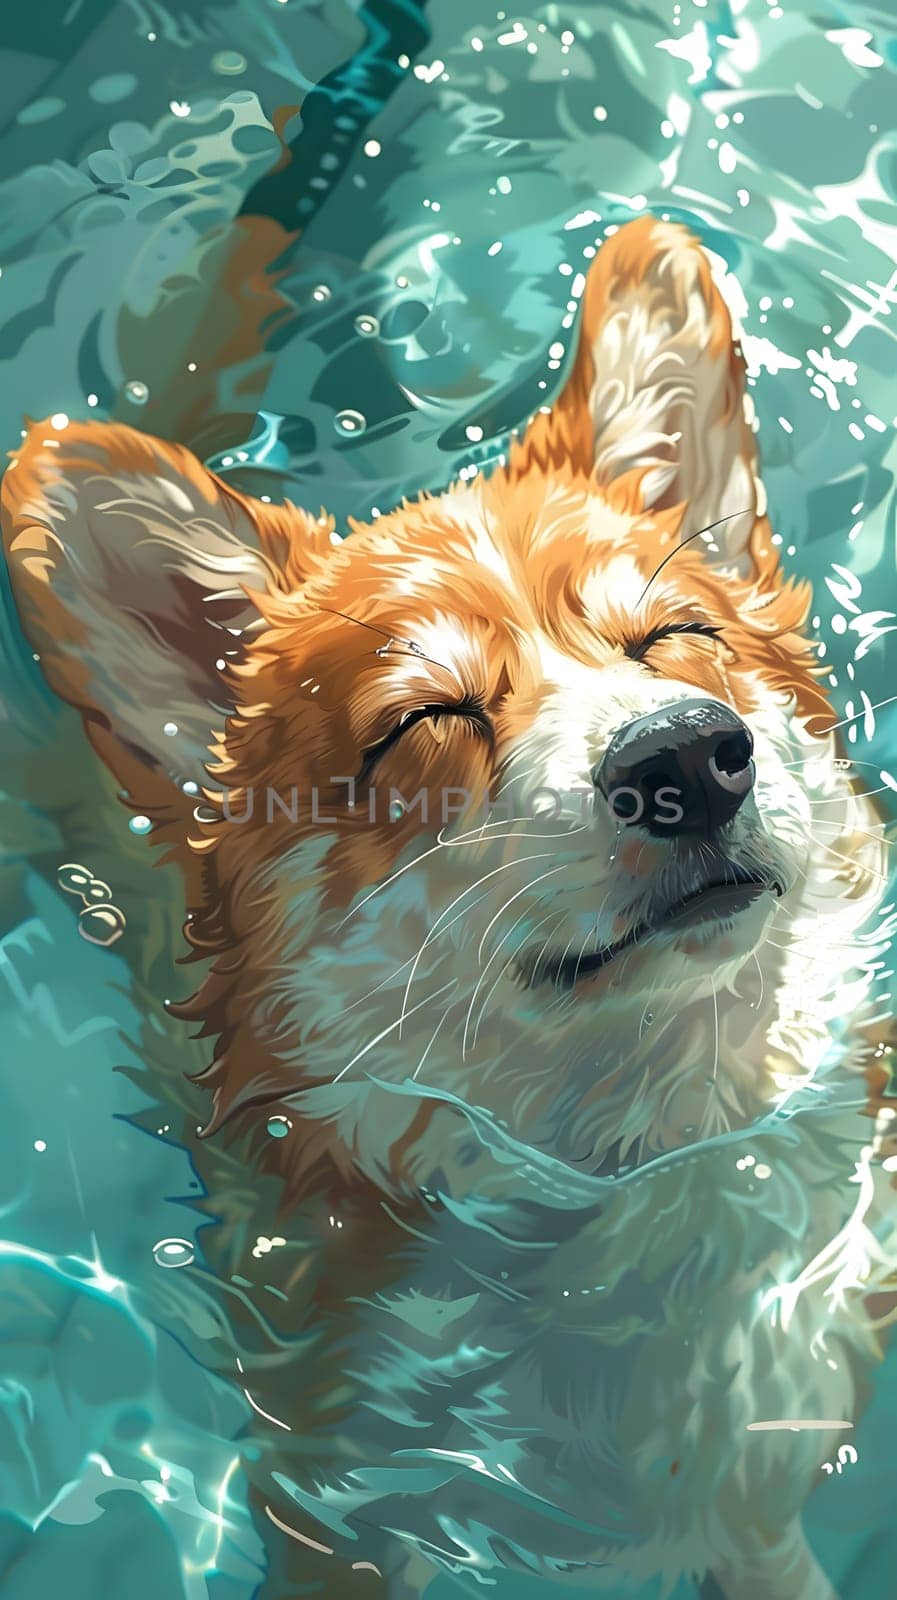 A carnivorous organism of the dog breed, the corgi, is swimming in a pool with its eyes closed. This fawn companion dog has a short snout with whiskers, enjoying the natural landscape